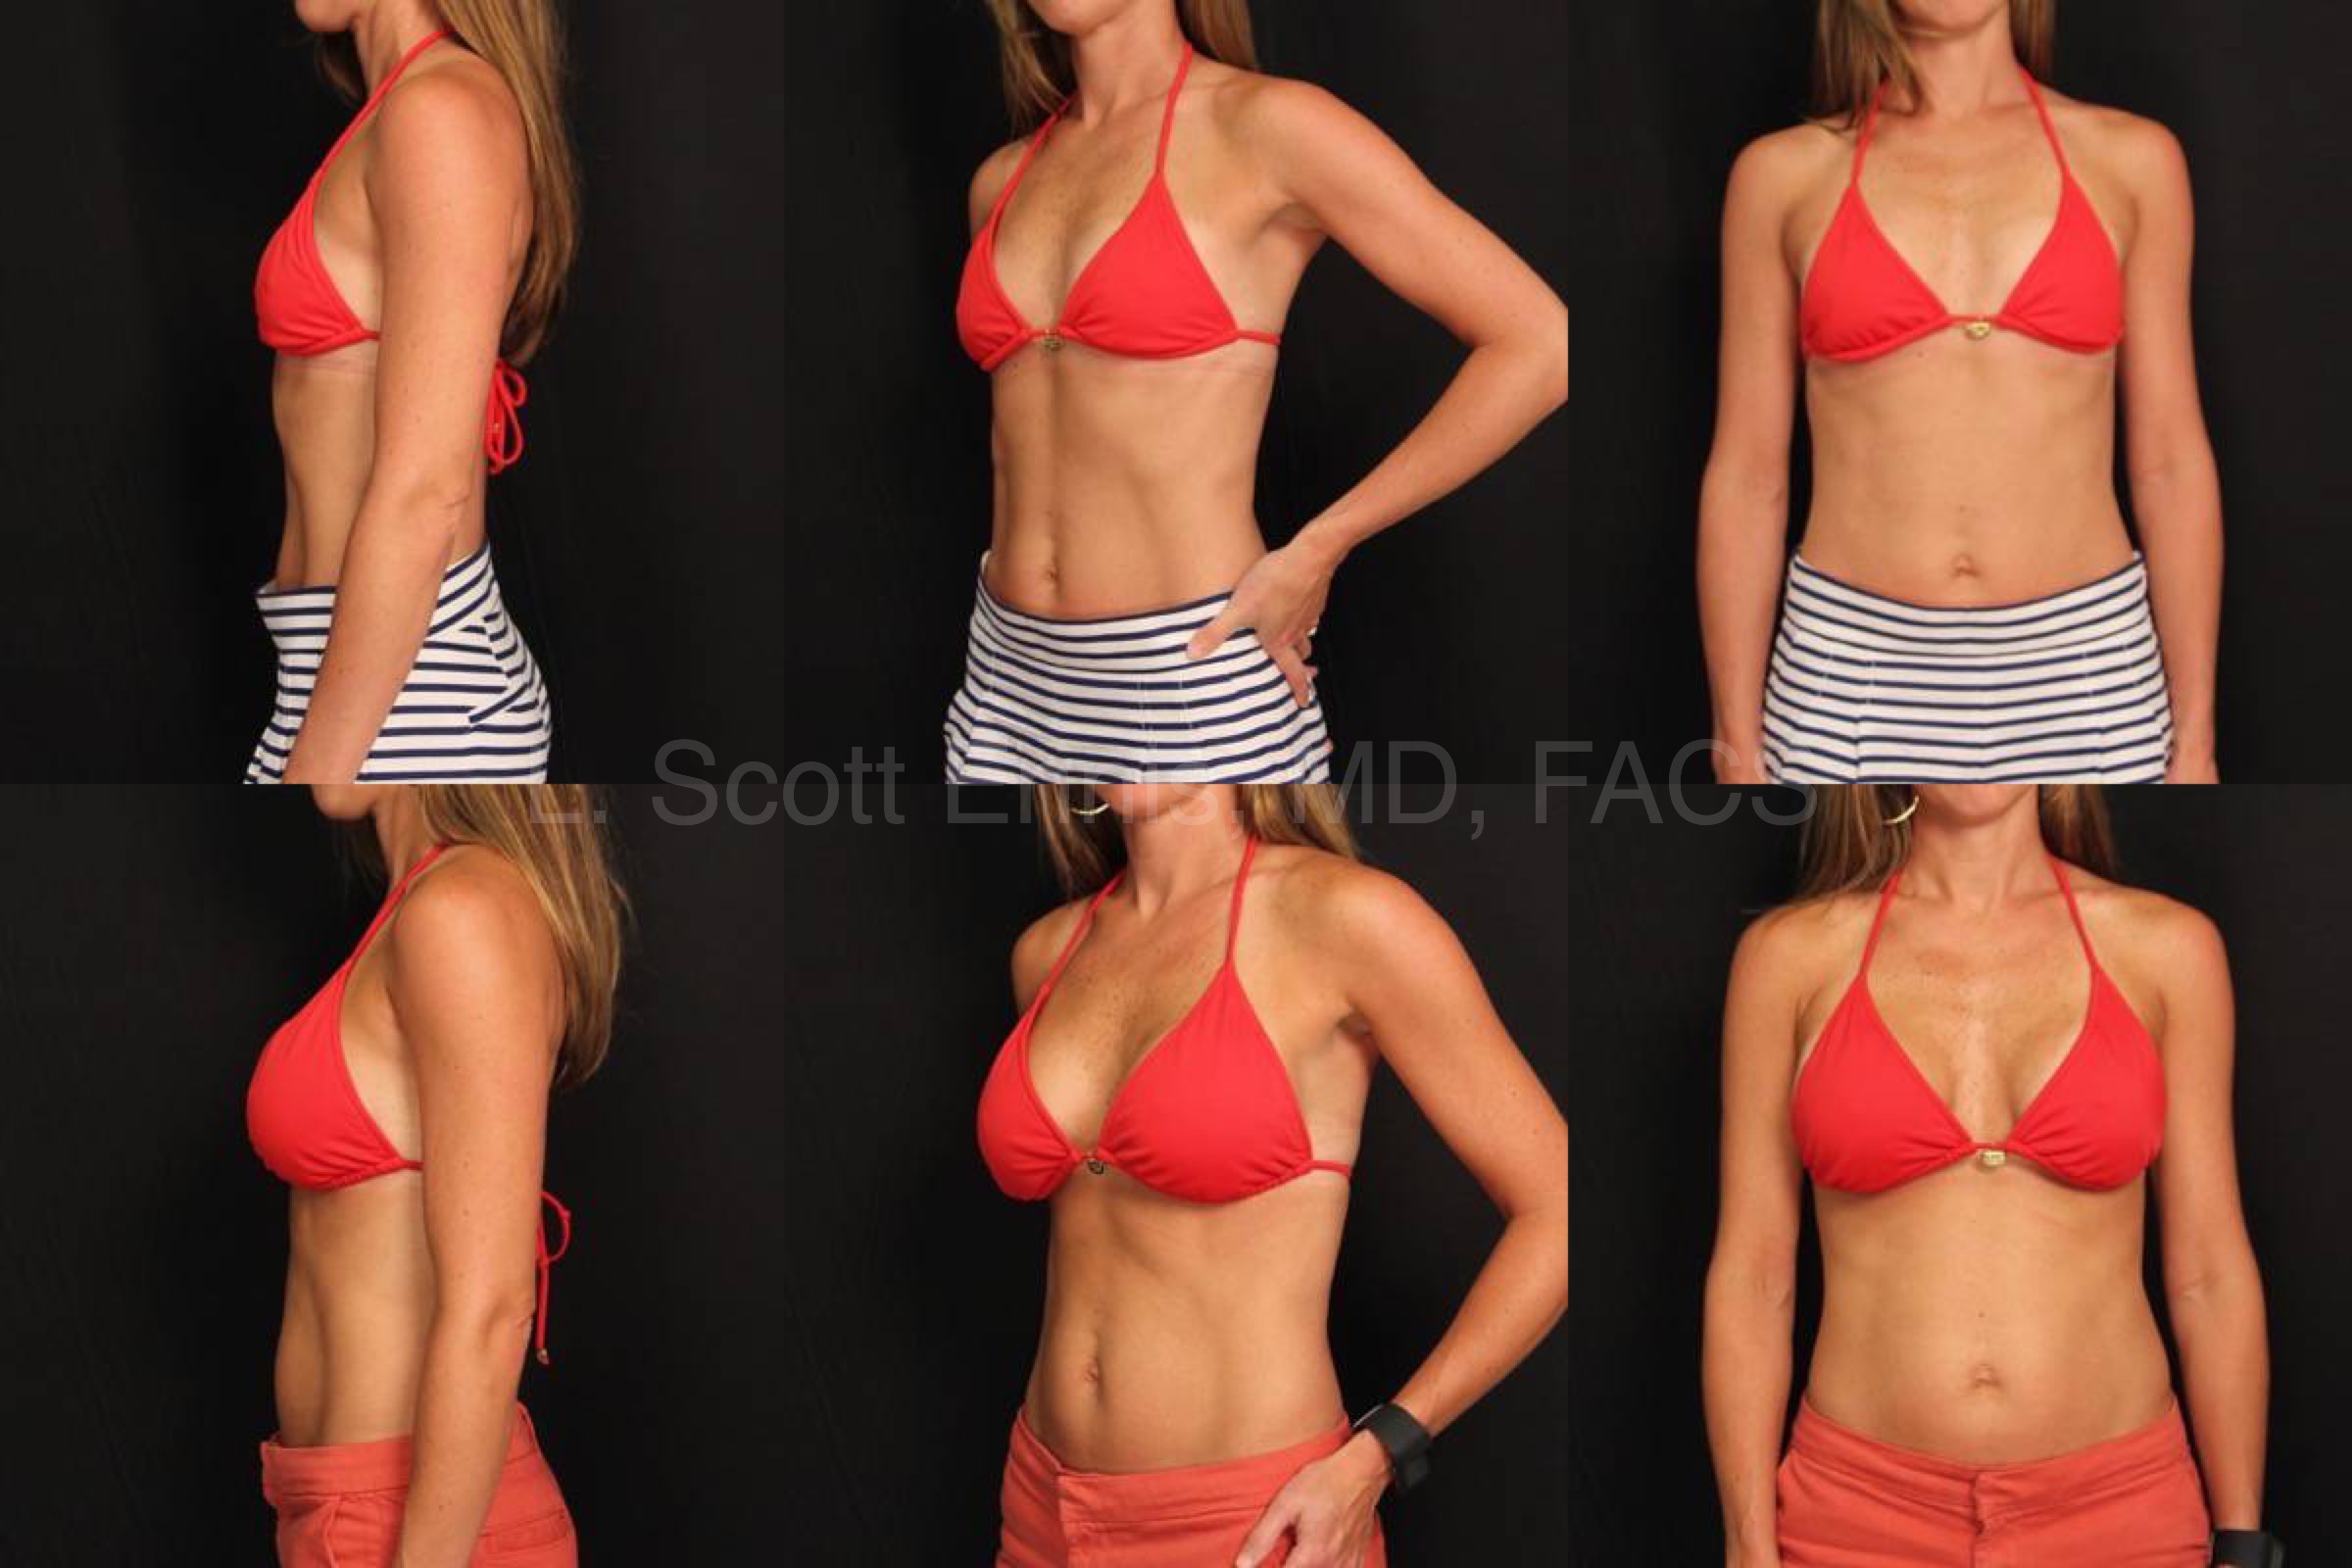 Endoscopic Transaxillary Breast Augmentation Mentor Smooth Moderate Plus Gel L350 R375 Before and After Ennis Plastic Surgery Palm Beach Boca Raton Destin Miami Fort Lauderdale